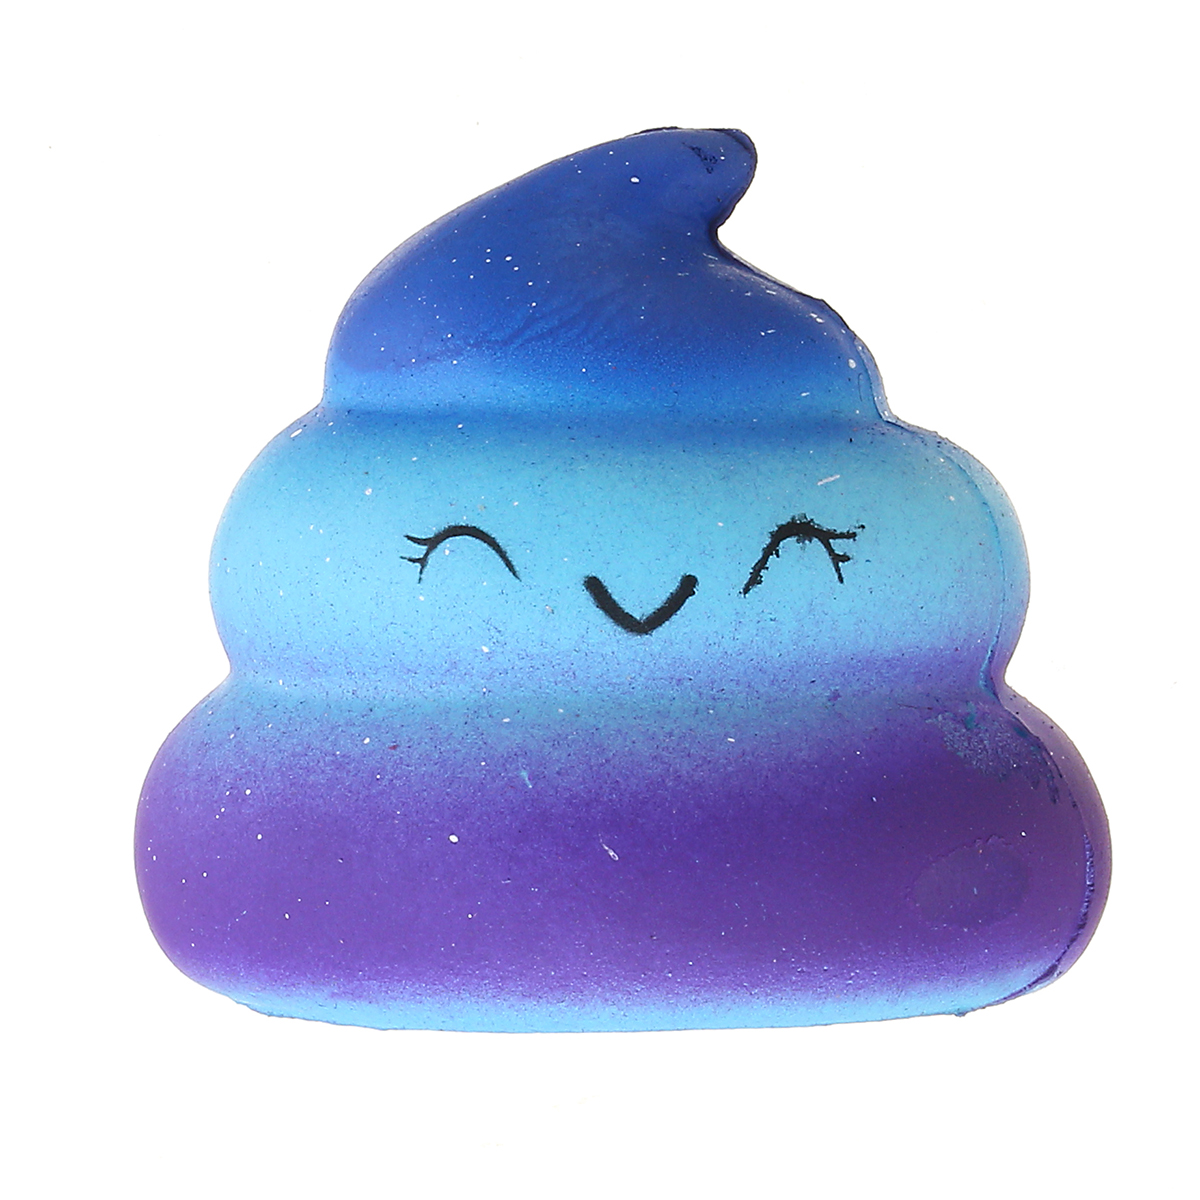 Squishy-Galaxy-Poo-Squishy-Hand-Pillow-65CM-Slow-Rising-With-Packaging-Collection-Gift-Decor-Toy-1311228-6